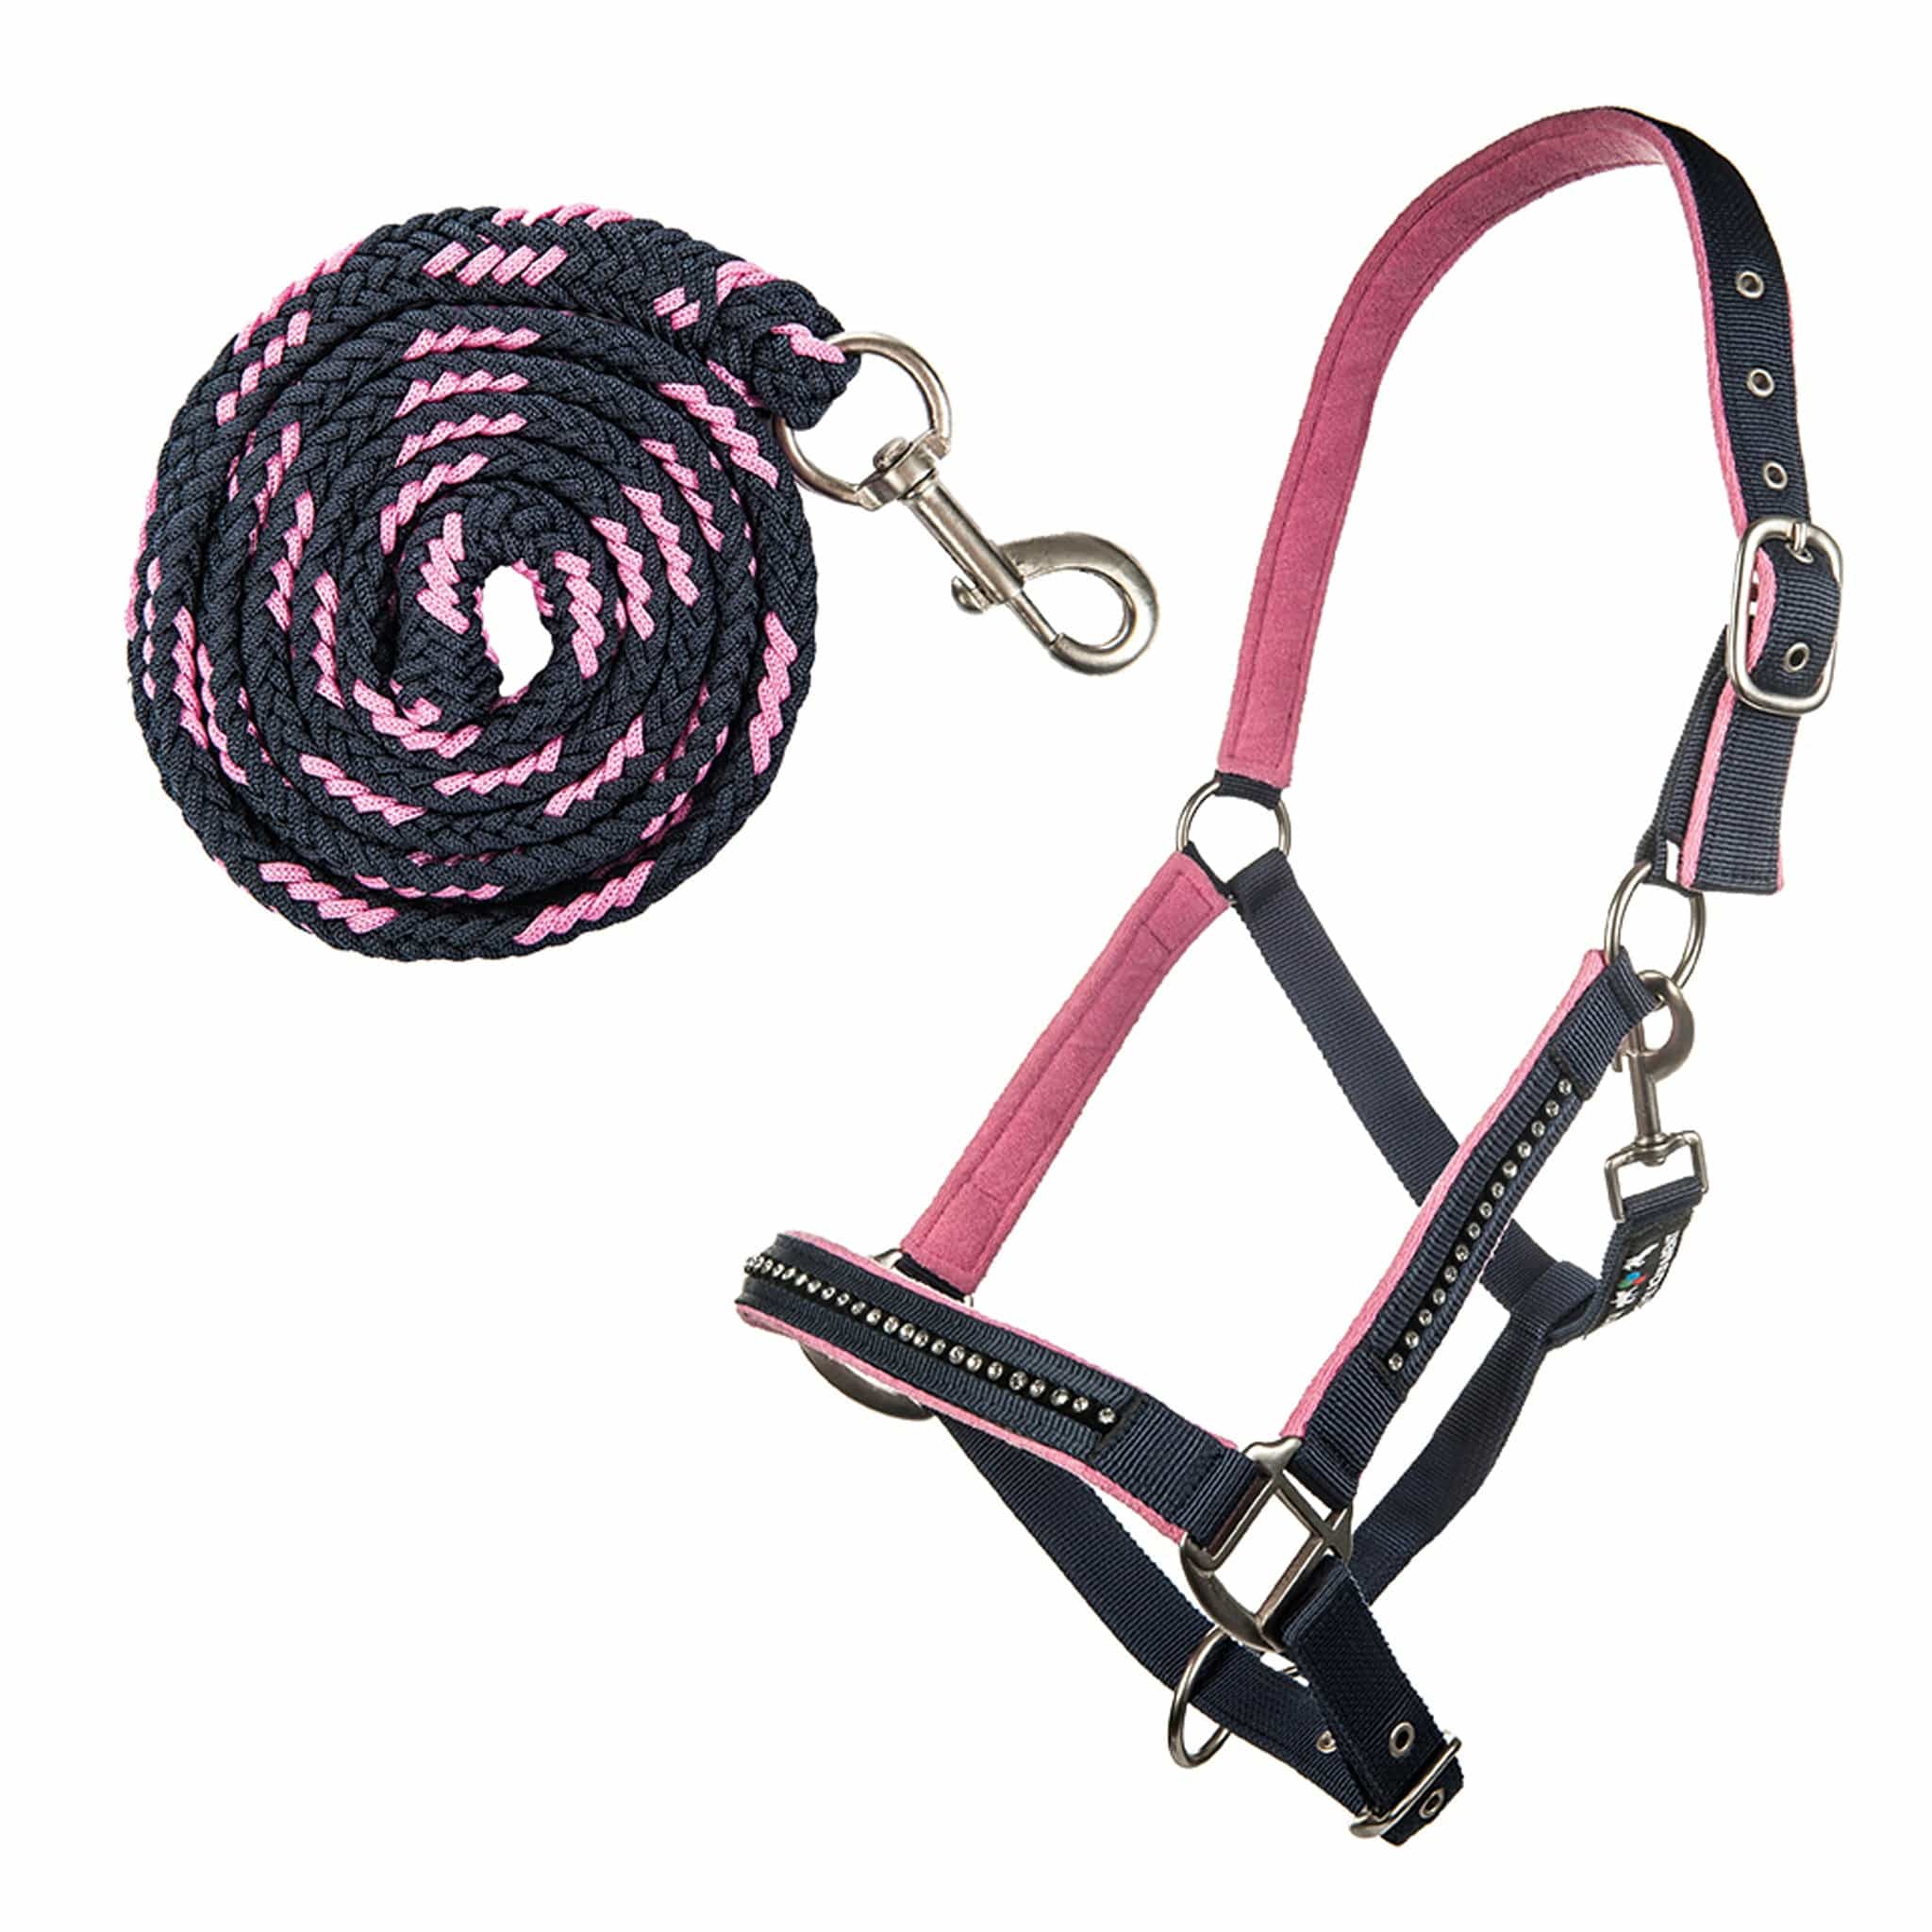 HKM Crystal Soft Padded Headcollar and Lead Rope 8978 Navy and Dark Pink